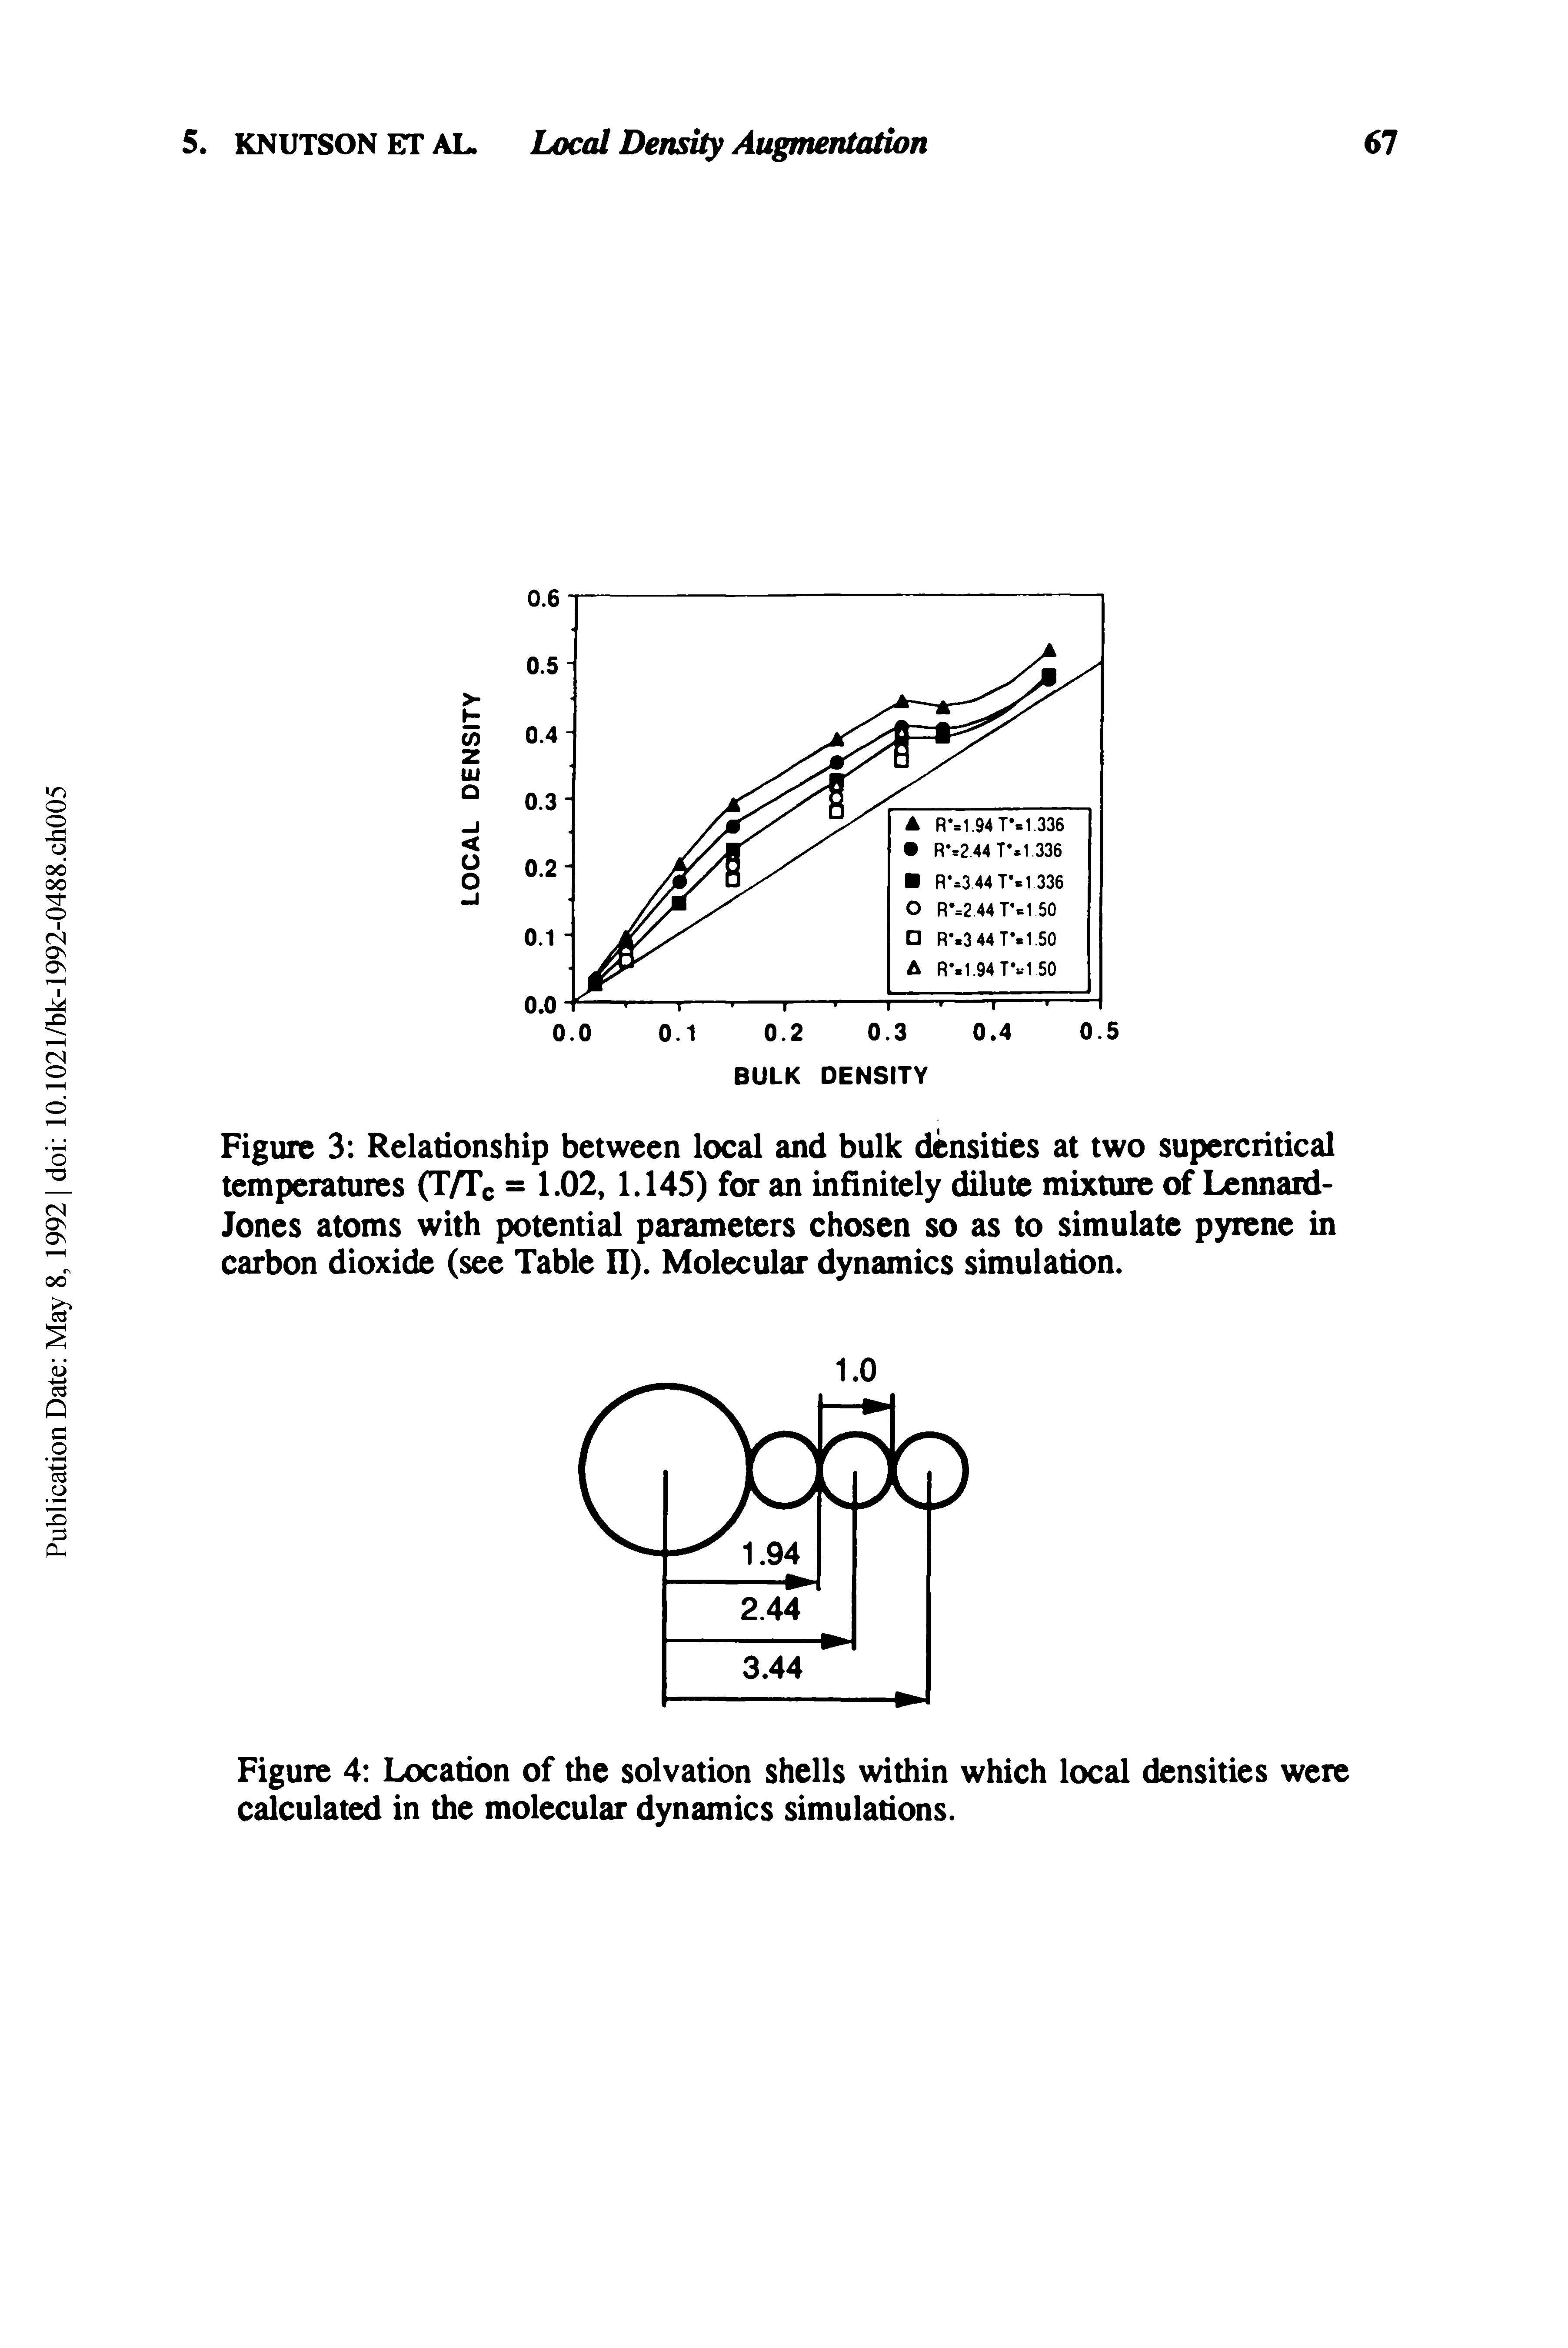 Figure 3 Relationship between local and bulk densities at two supercritical temperatures (T7TC = 1.02, 1.145) for an infinitely dilute mixture of Lennard-Jones atoms with potential parameters chosen so as to simulate pyrene in carbon dioxide (see Table II). Molecular dynamics simulation.